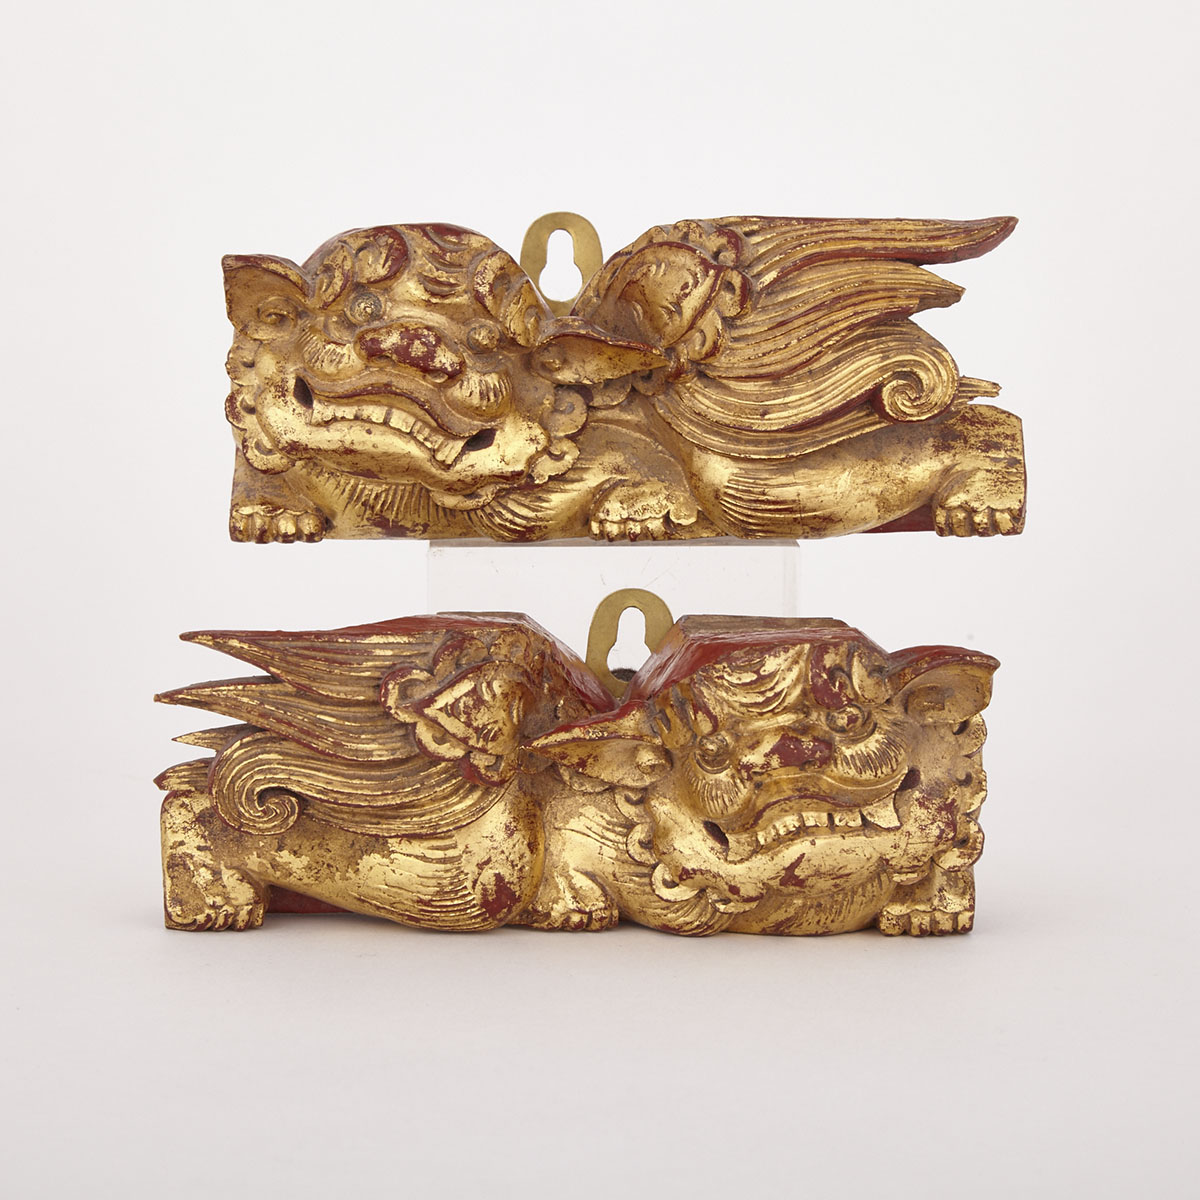 Pair of Gilt Architectural Fragments